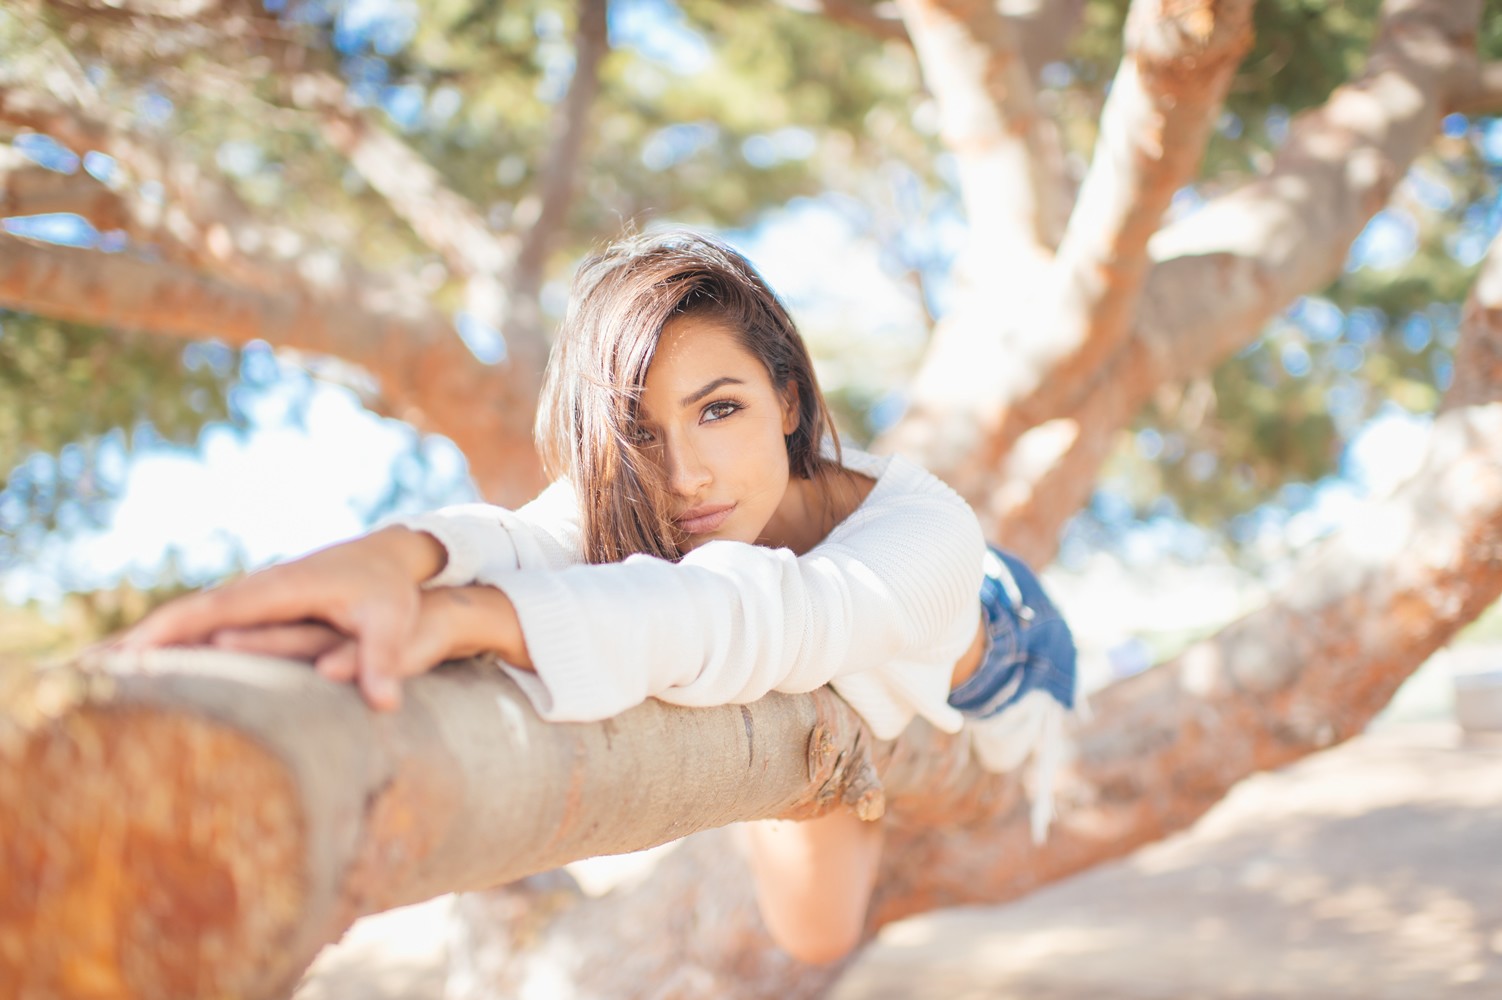 People 1502x1000 Michele Maturo women women outdoors bright trees wood nature outdoors makeup looking at viewer model